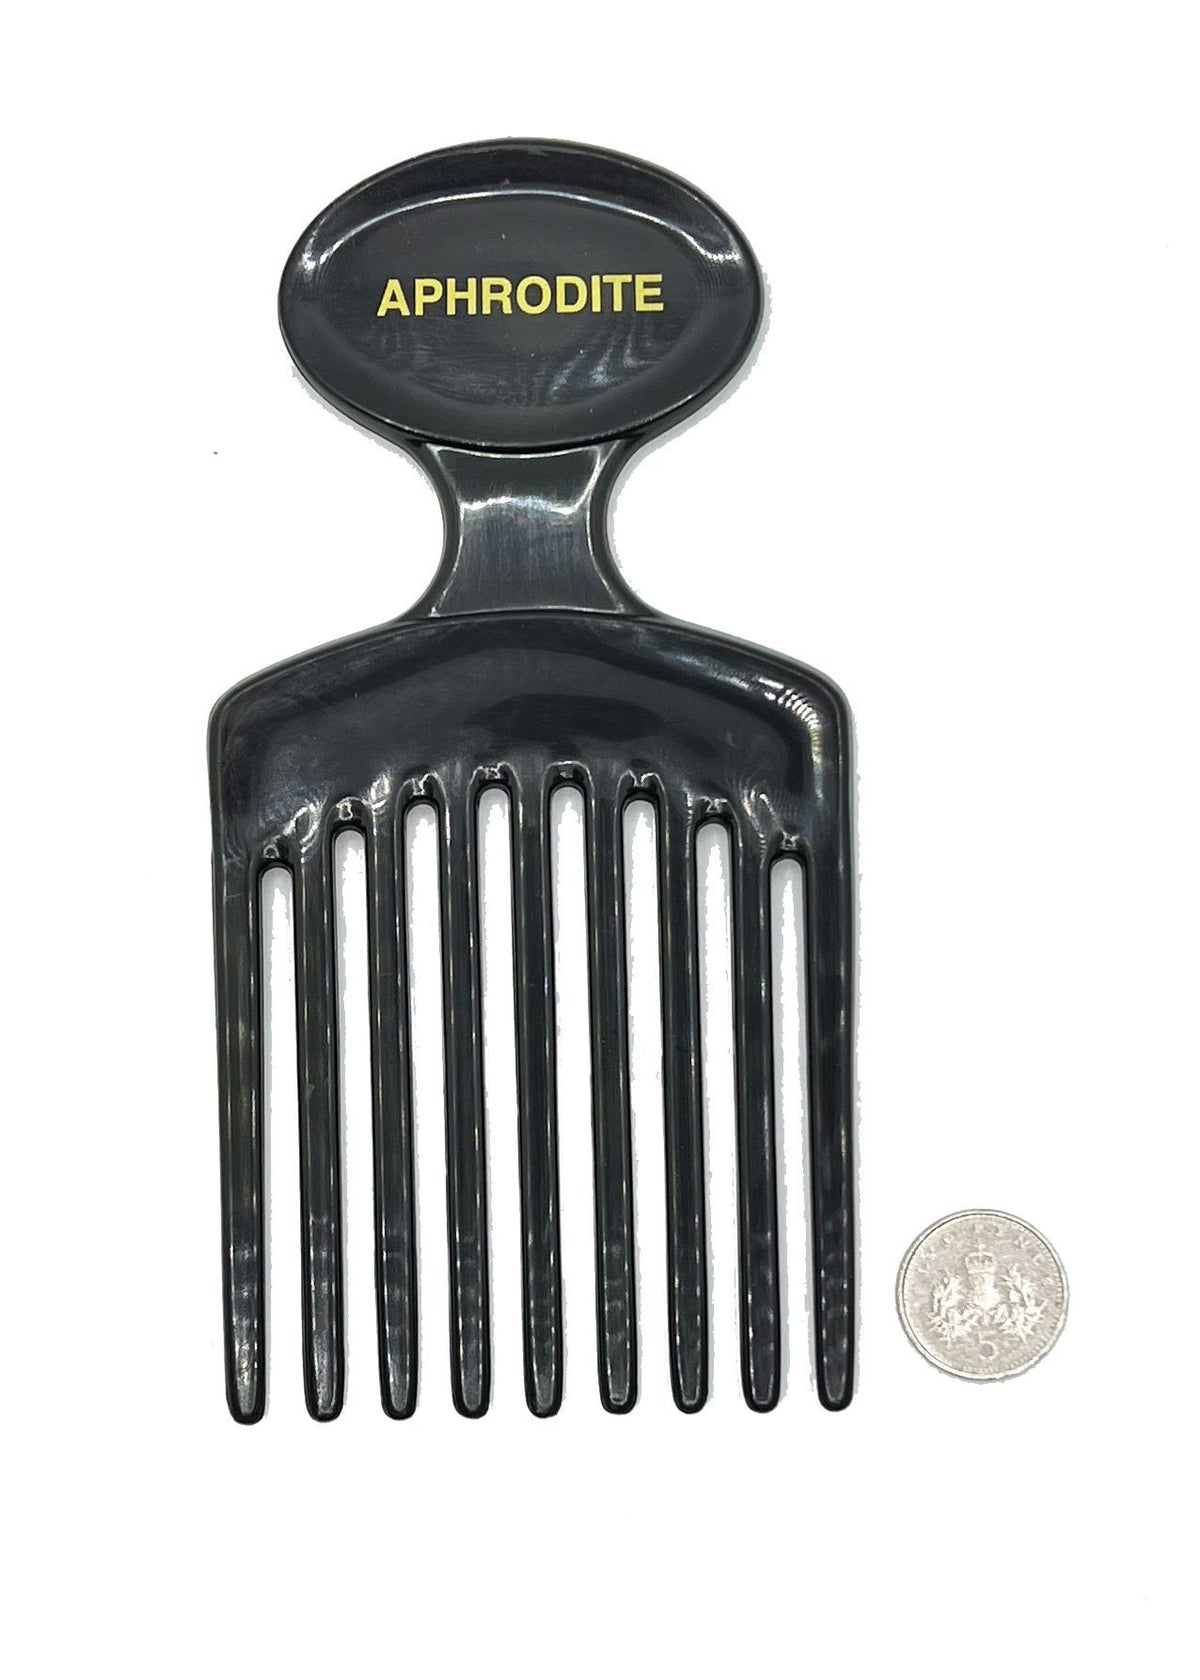 Pocket Afro Comb - Beauty Hair Products Ltd